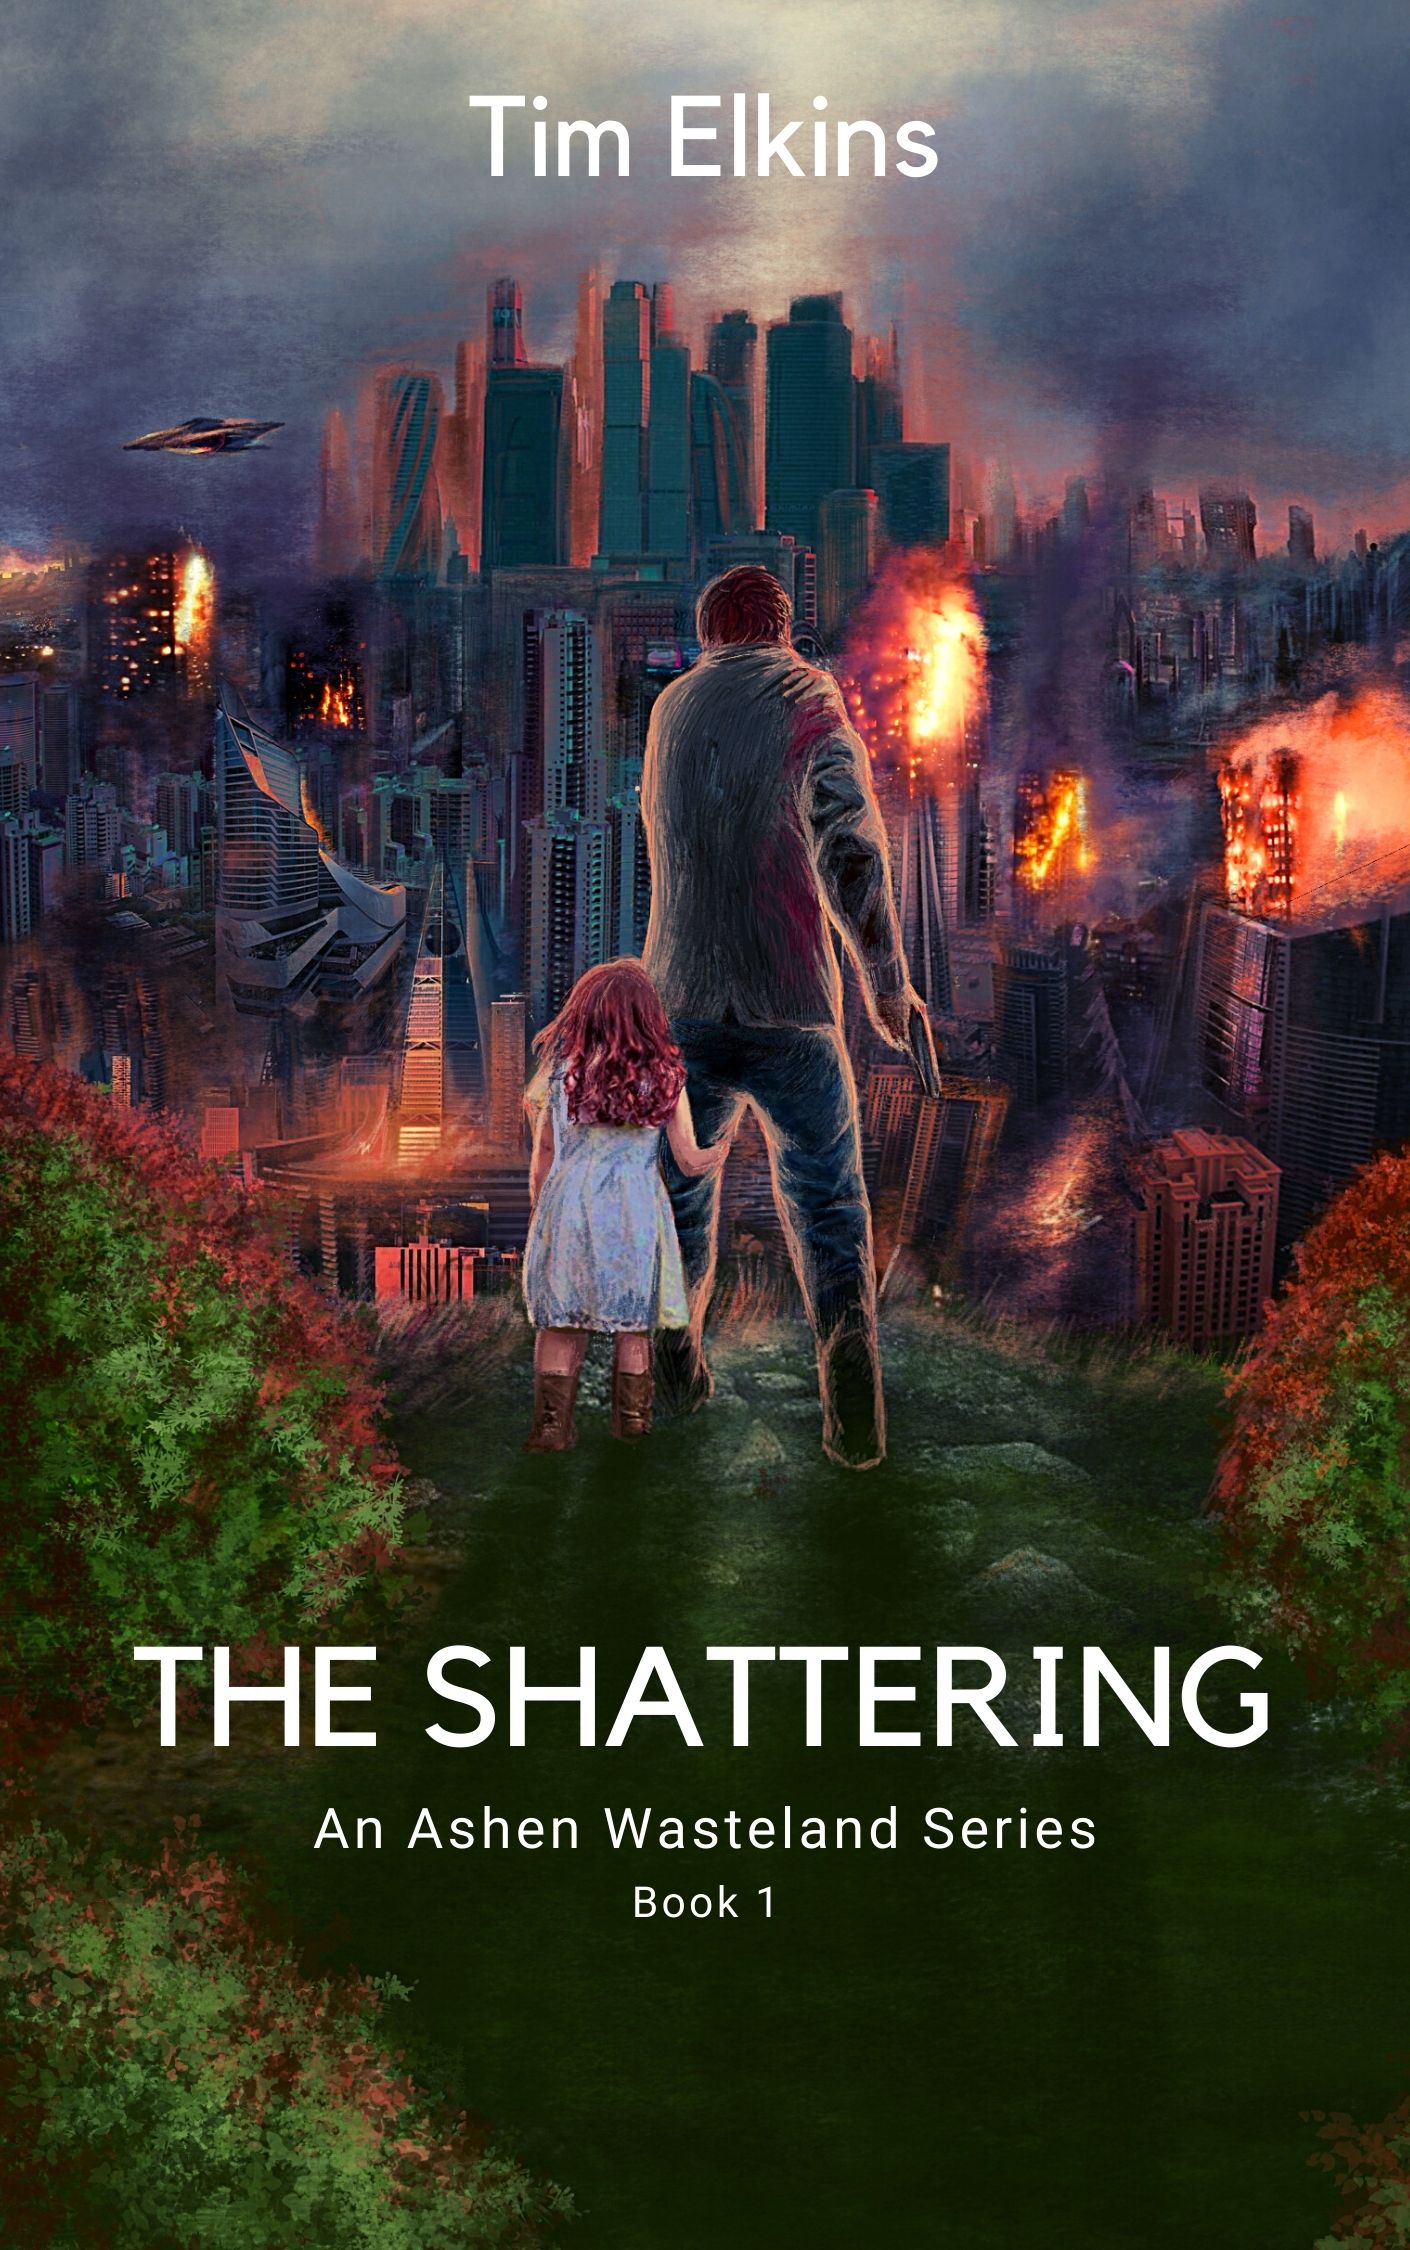 FREE: The Shattering: An Ashen Wasteland Series (The Prequel) by Tim Elkins